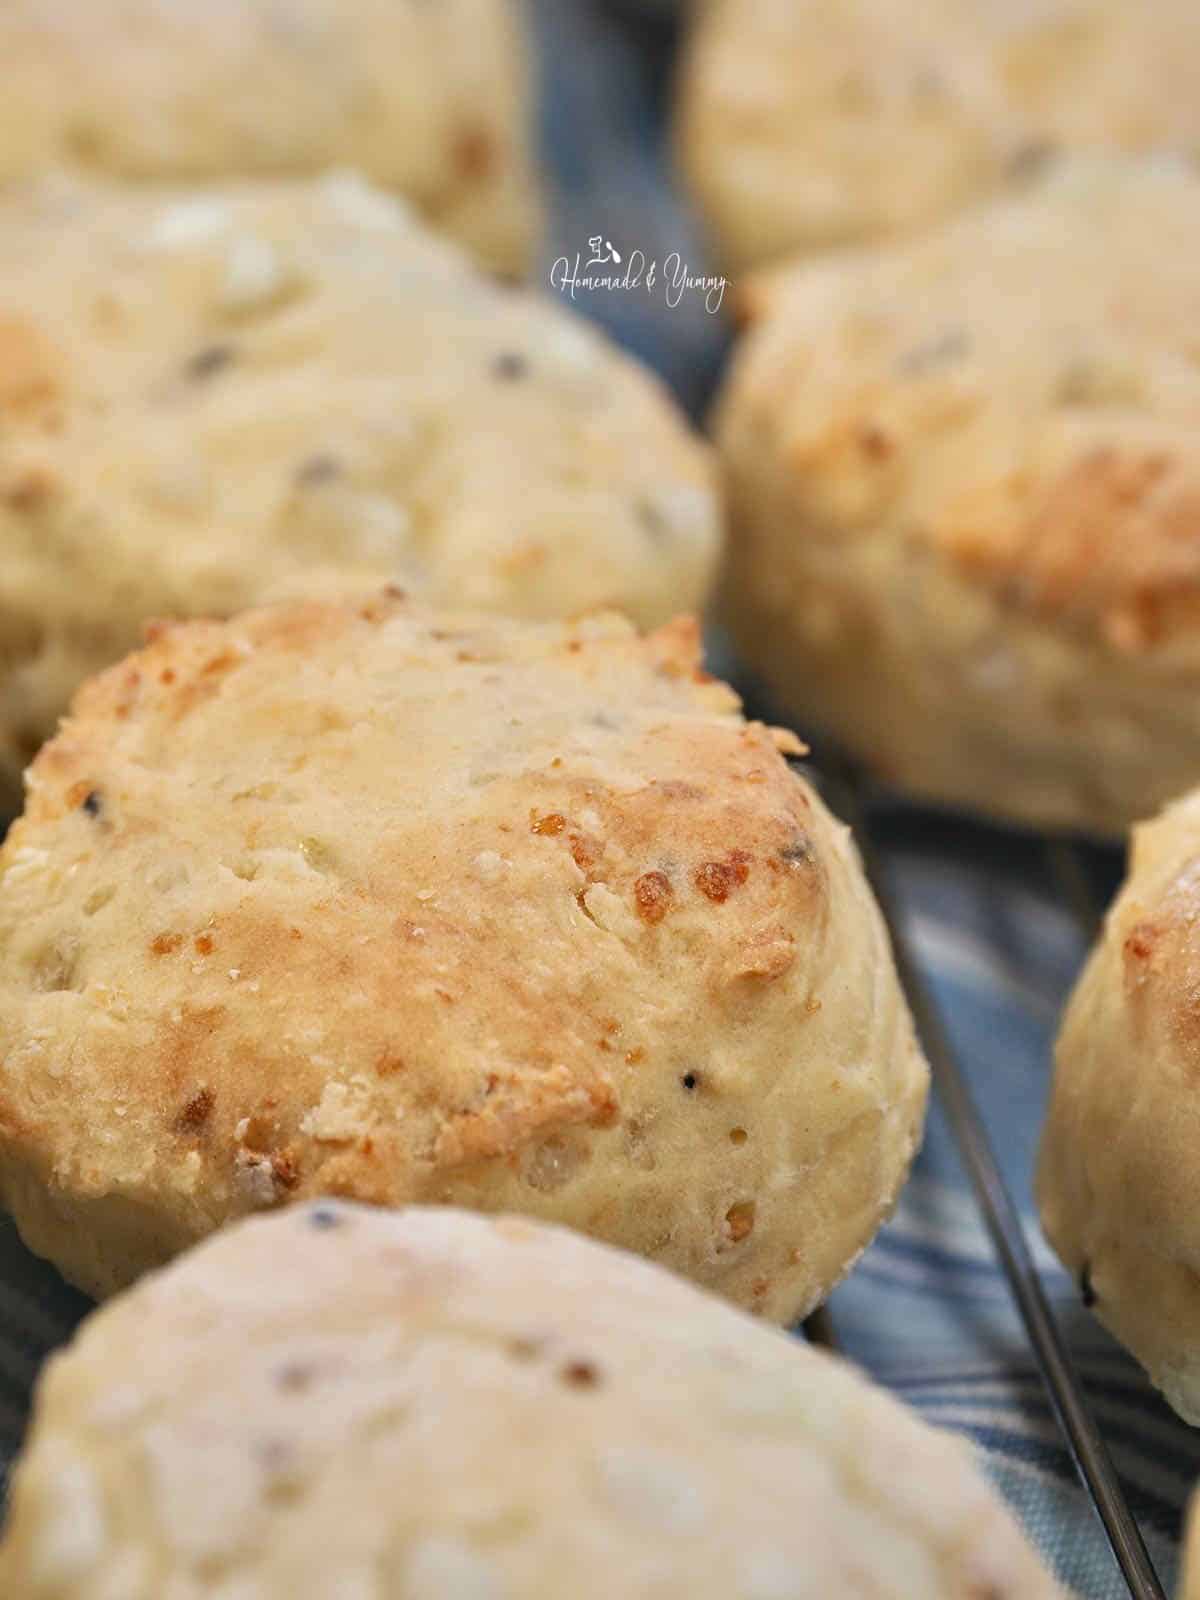 Biscuits made from scratch with cottage cheese.